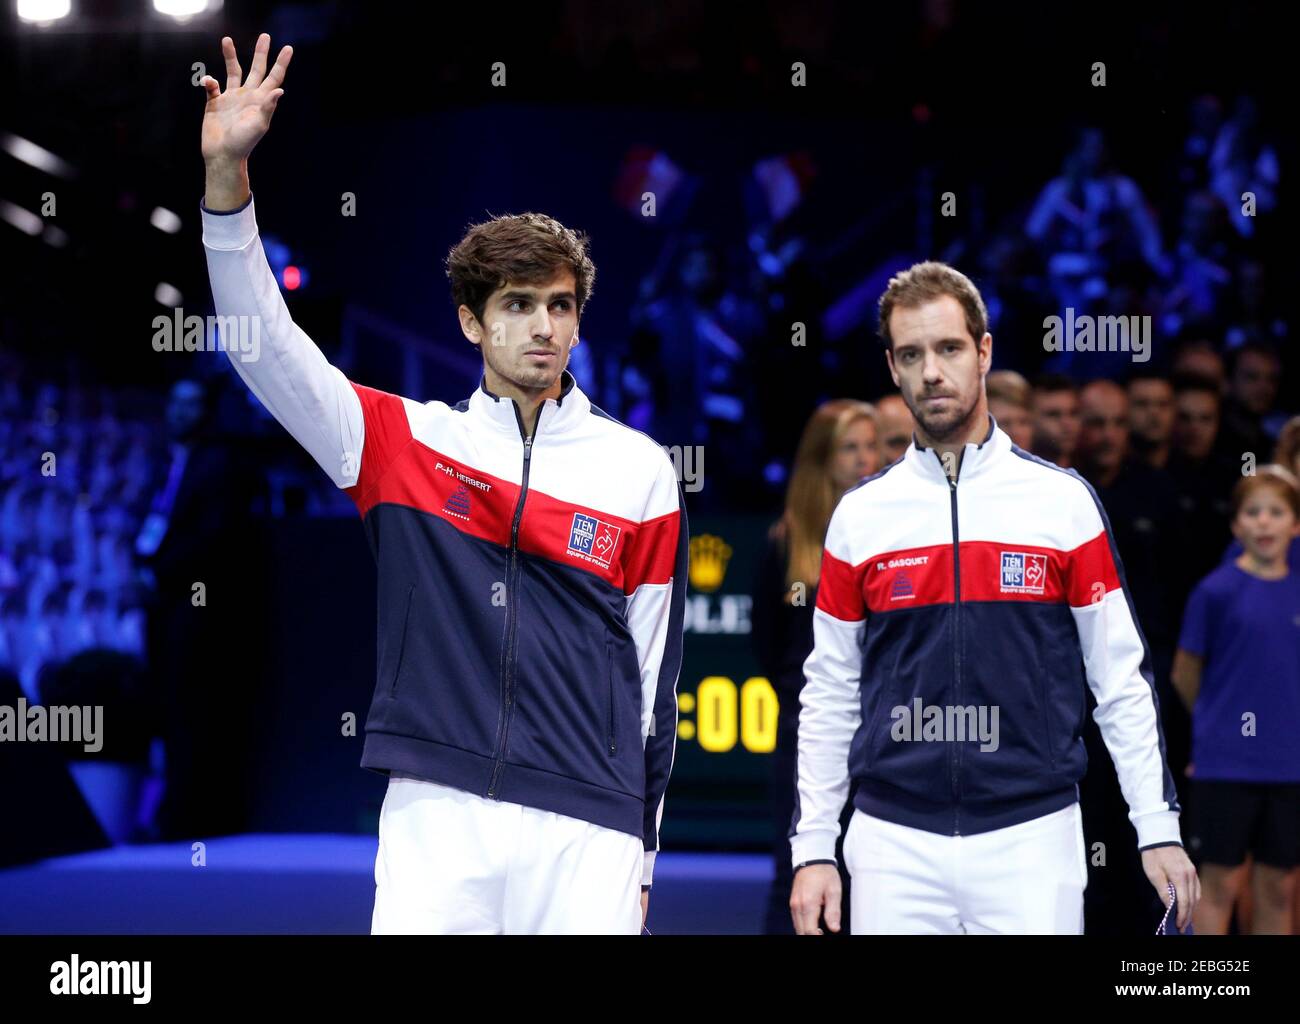 Tennis - Davis Cup Final - France vs Belgium - Stade Pierre Mauroy, Lille,  France - November 24, 2017 Pierre-Hugues Herbert of France waves during the  opening ceremony REUTERS/Pascal Rossignol Stock Photo - Alamy